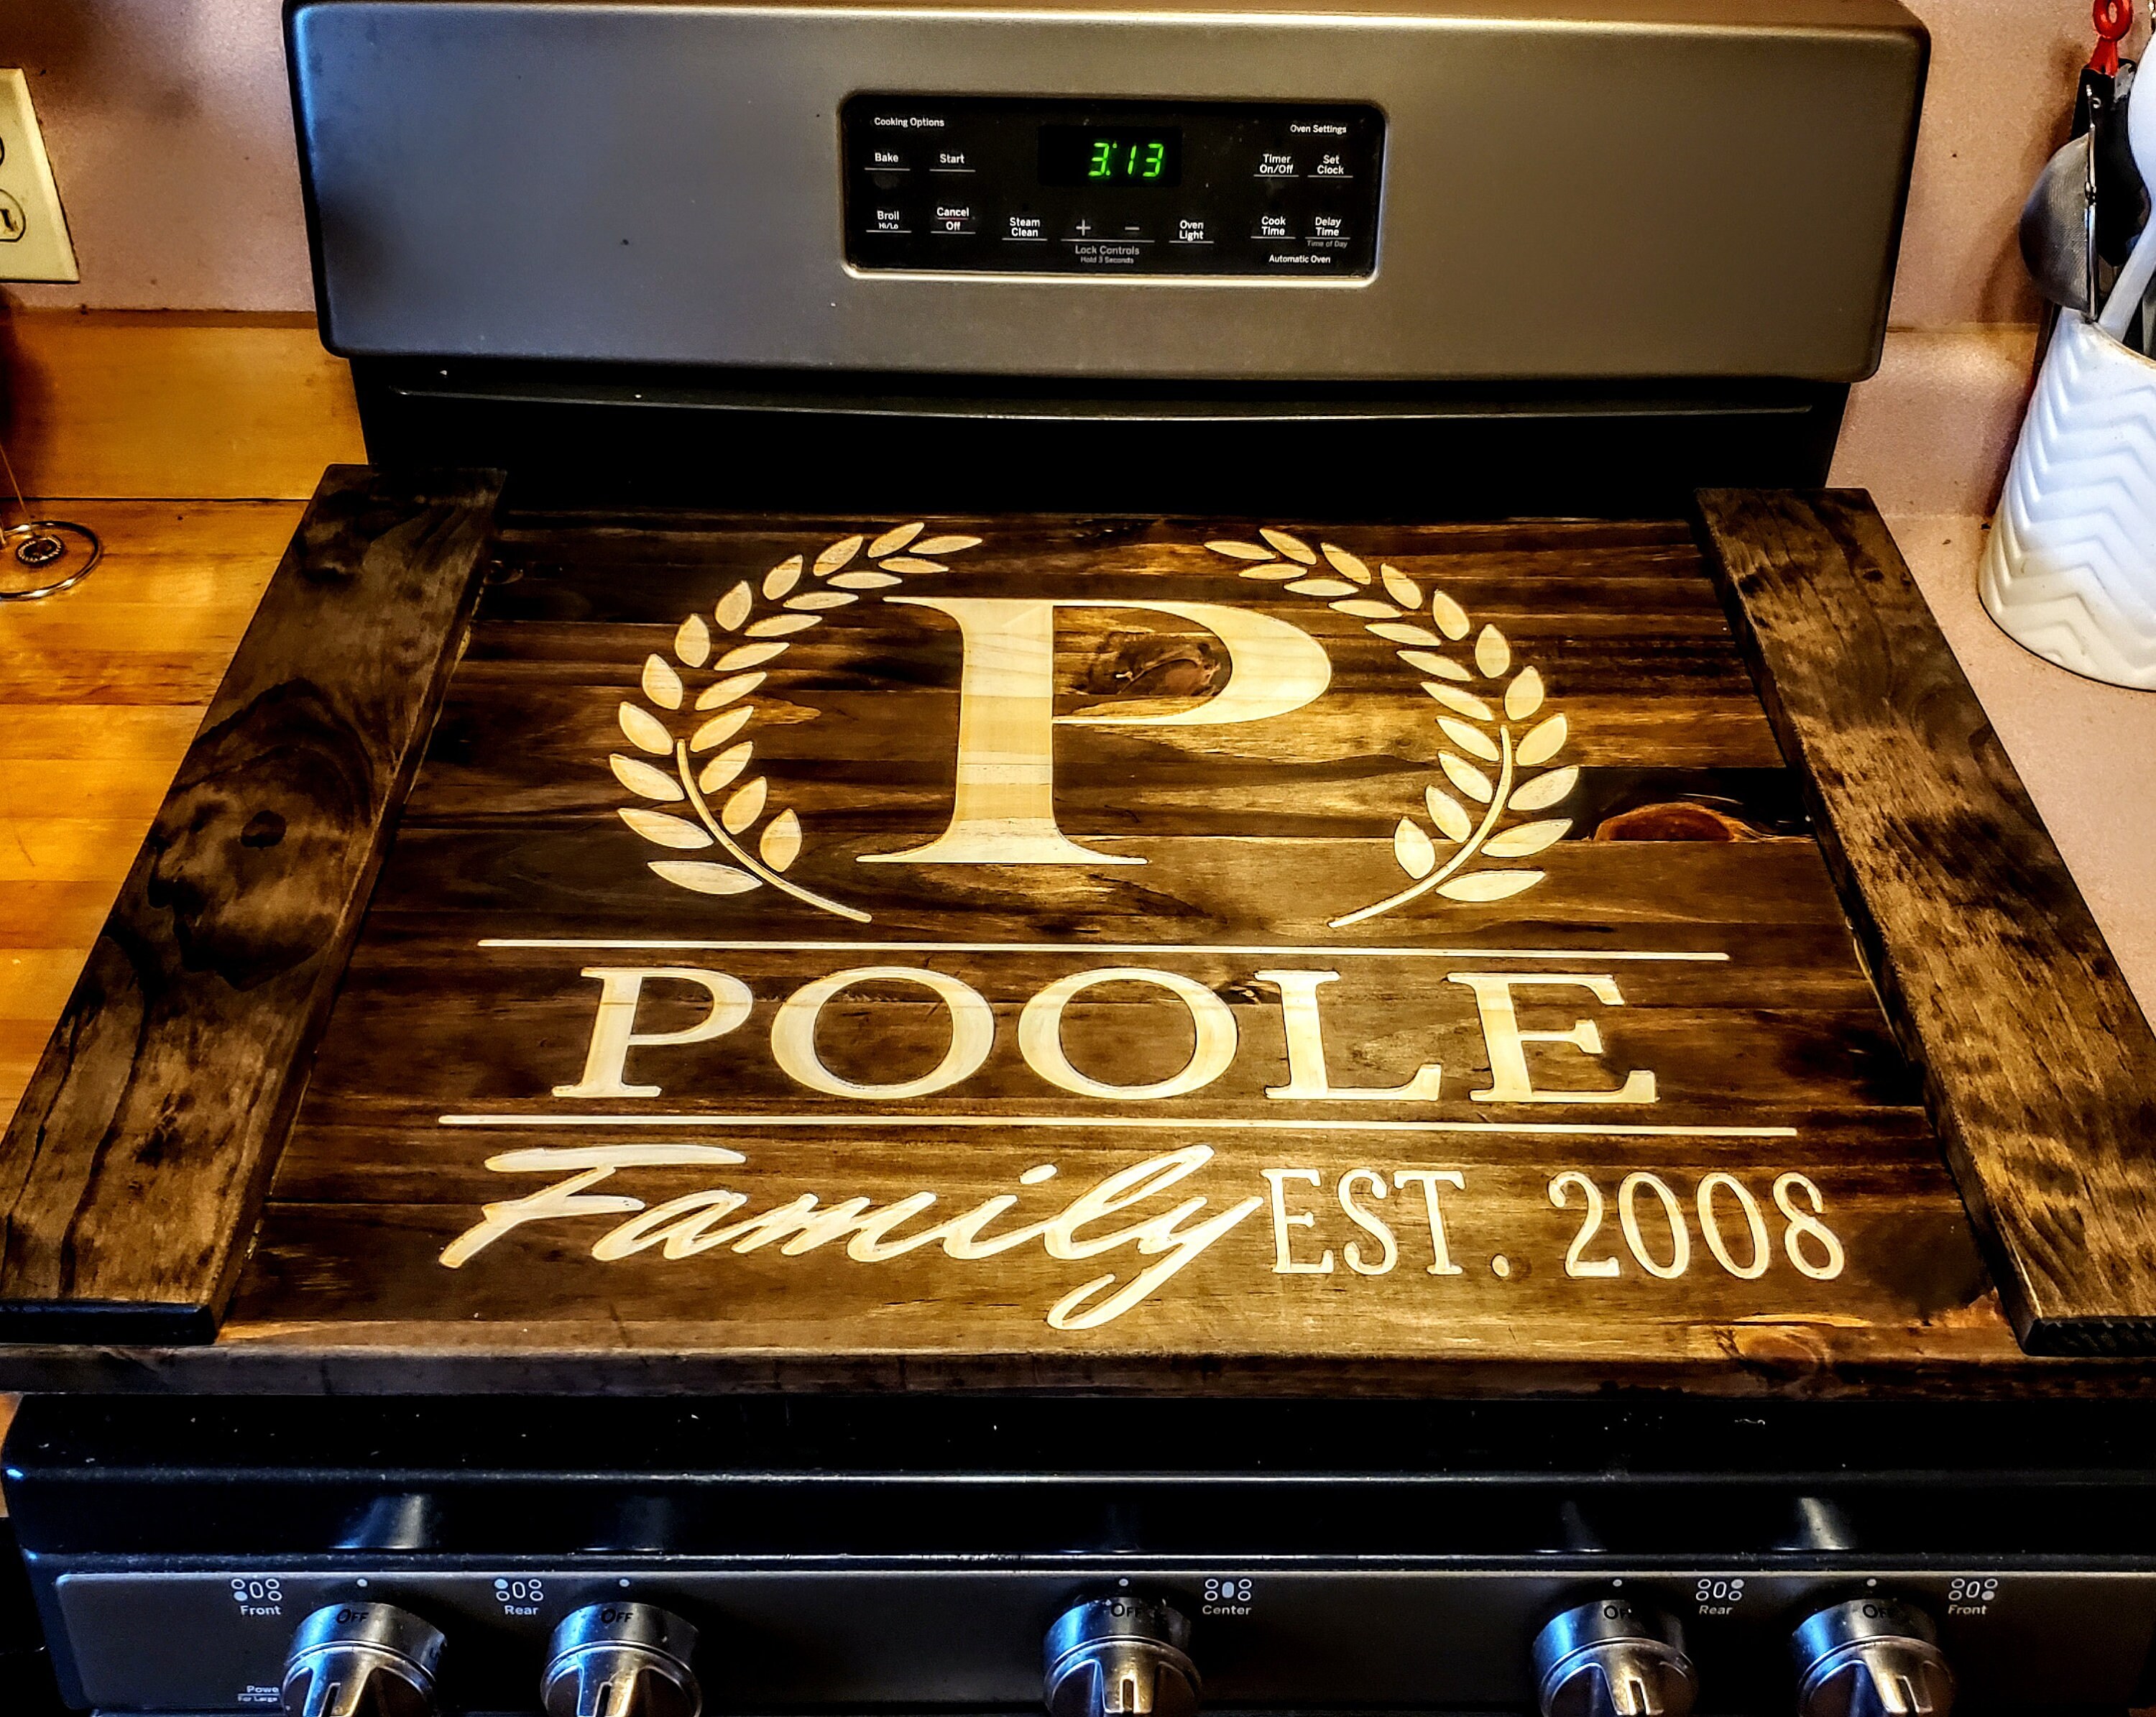 Personalized Noodle Board for Stove Top. Hand Made Hard Wood Gas or  Electric Range Cover. Real Cherry, Walnut, Maple. No Stains. Food Safe. 